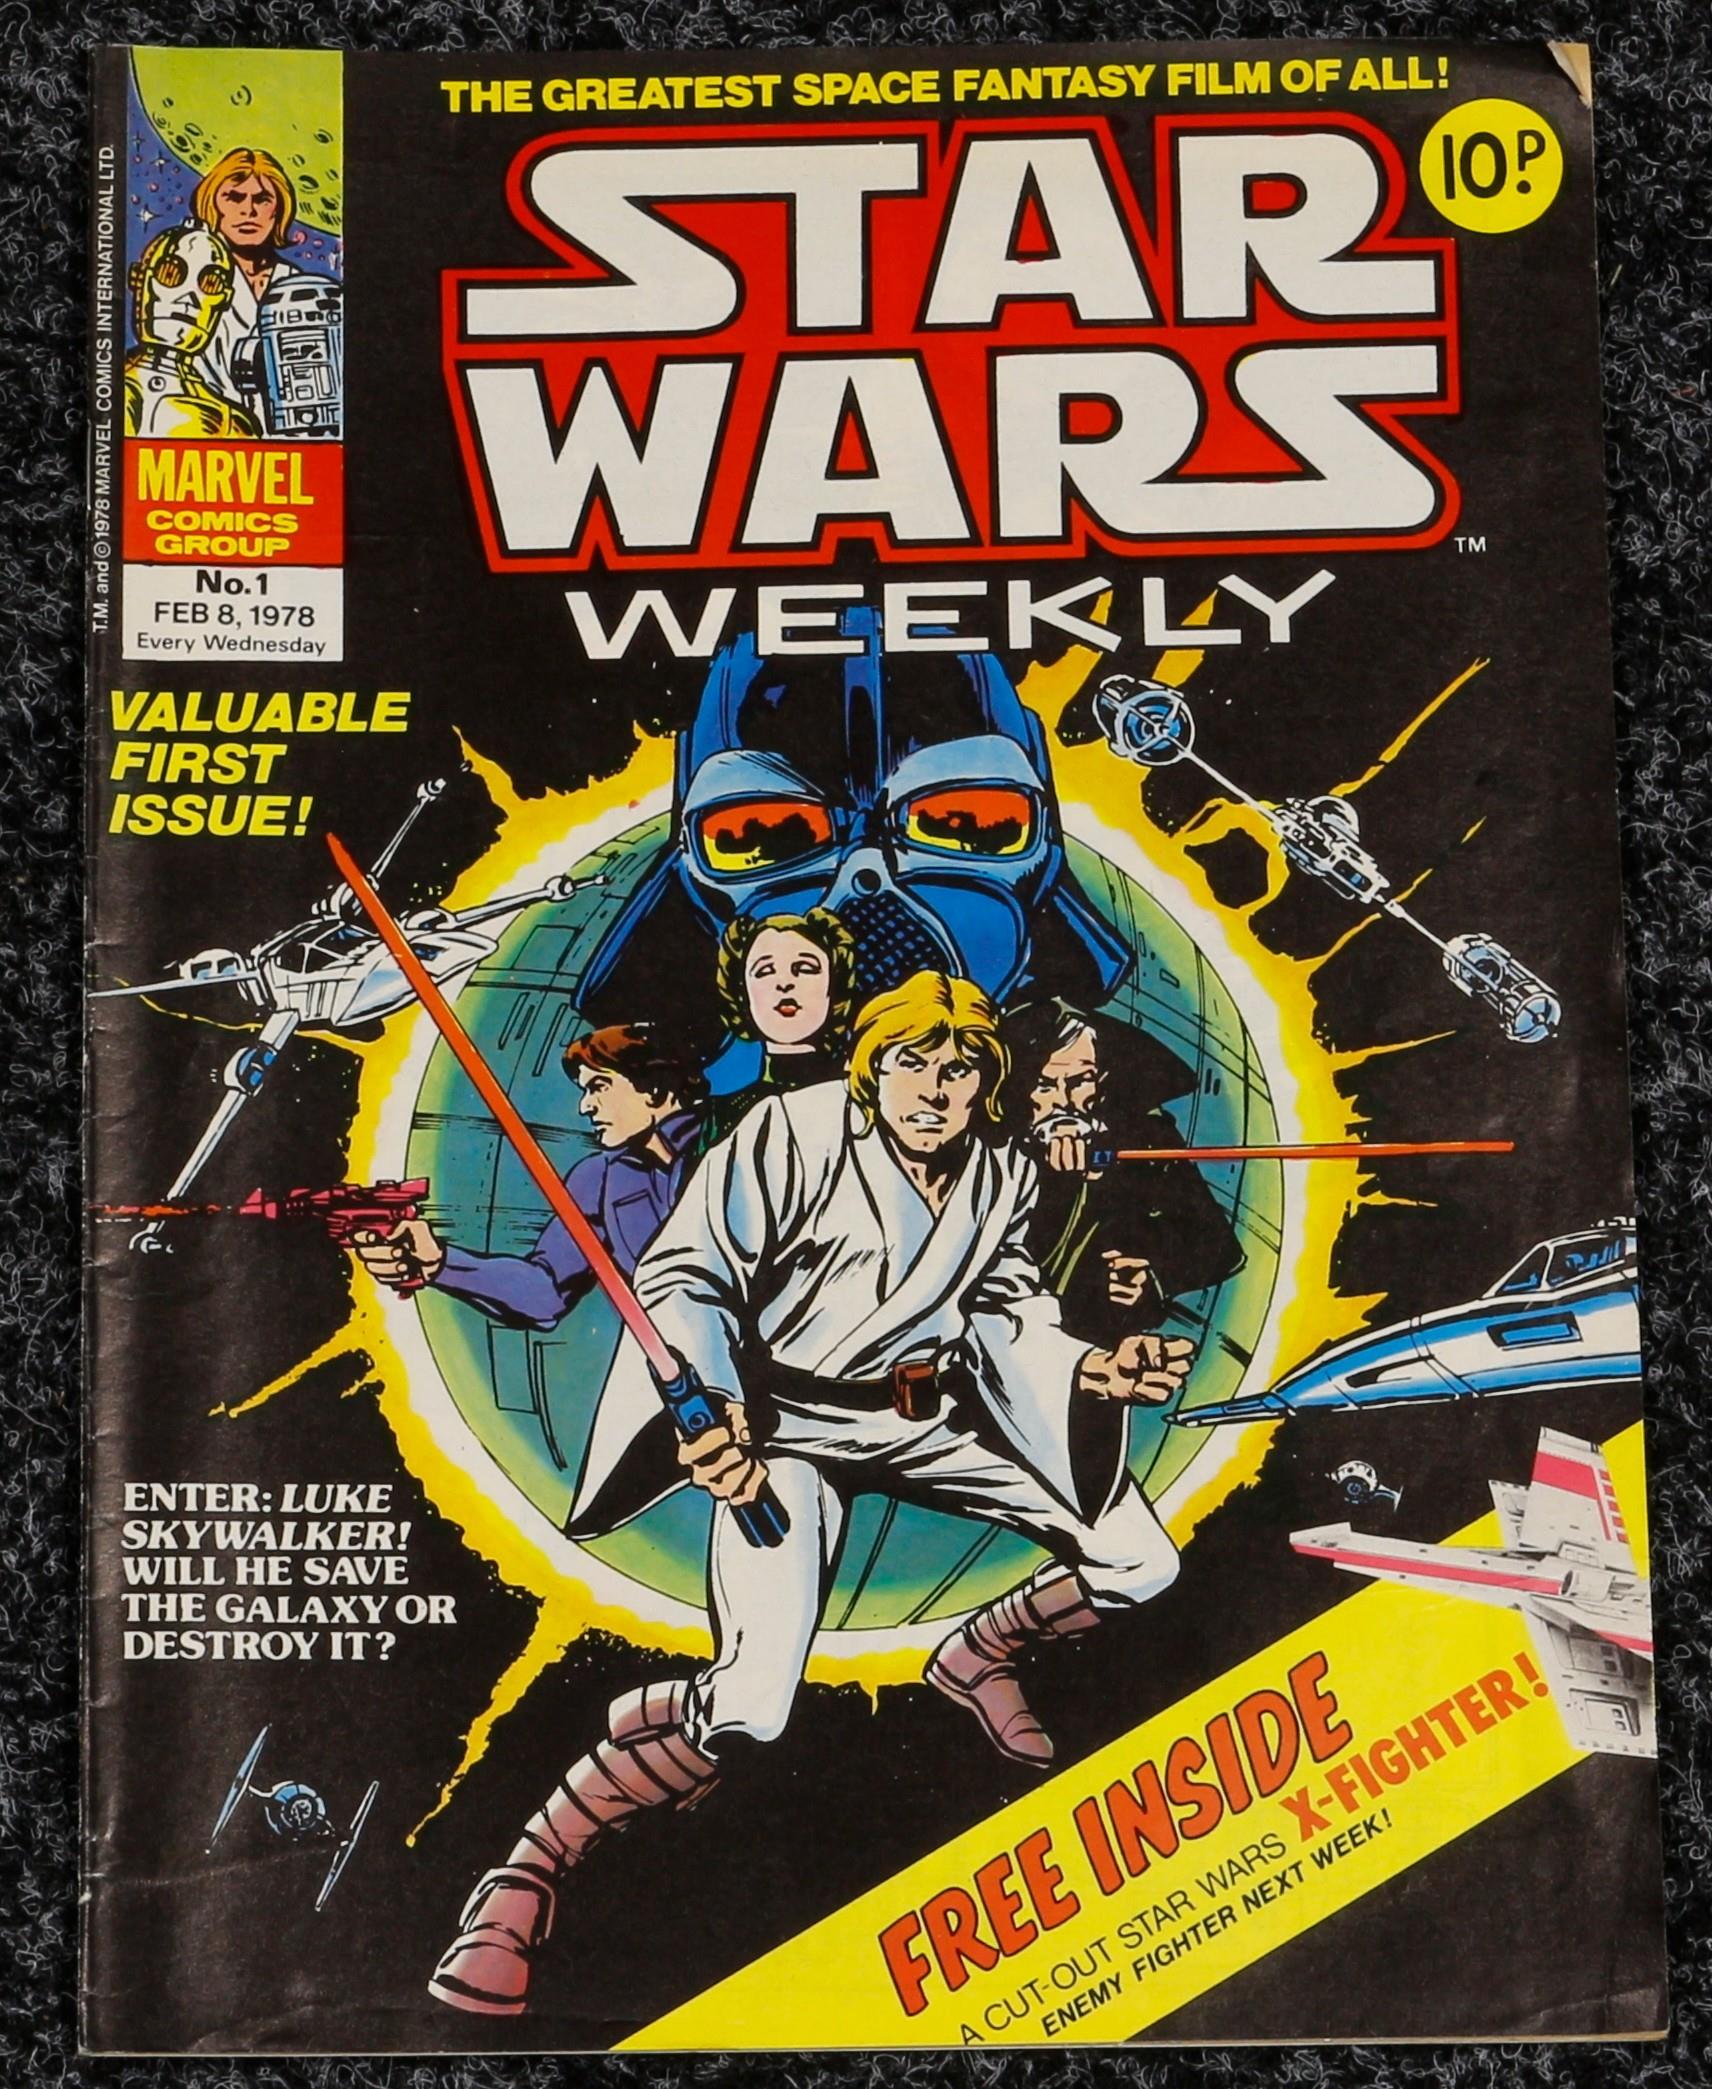 Comics, Sci-Fi Interest, Marvel Comics Group Star Wars Weekly, comprising #1 with free gift - Image 2 of 3